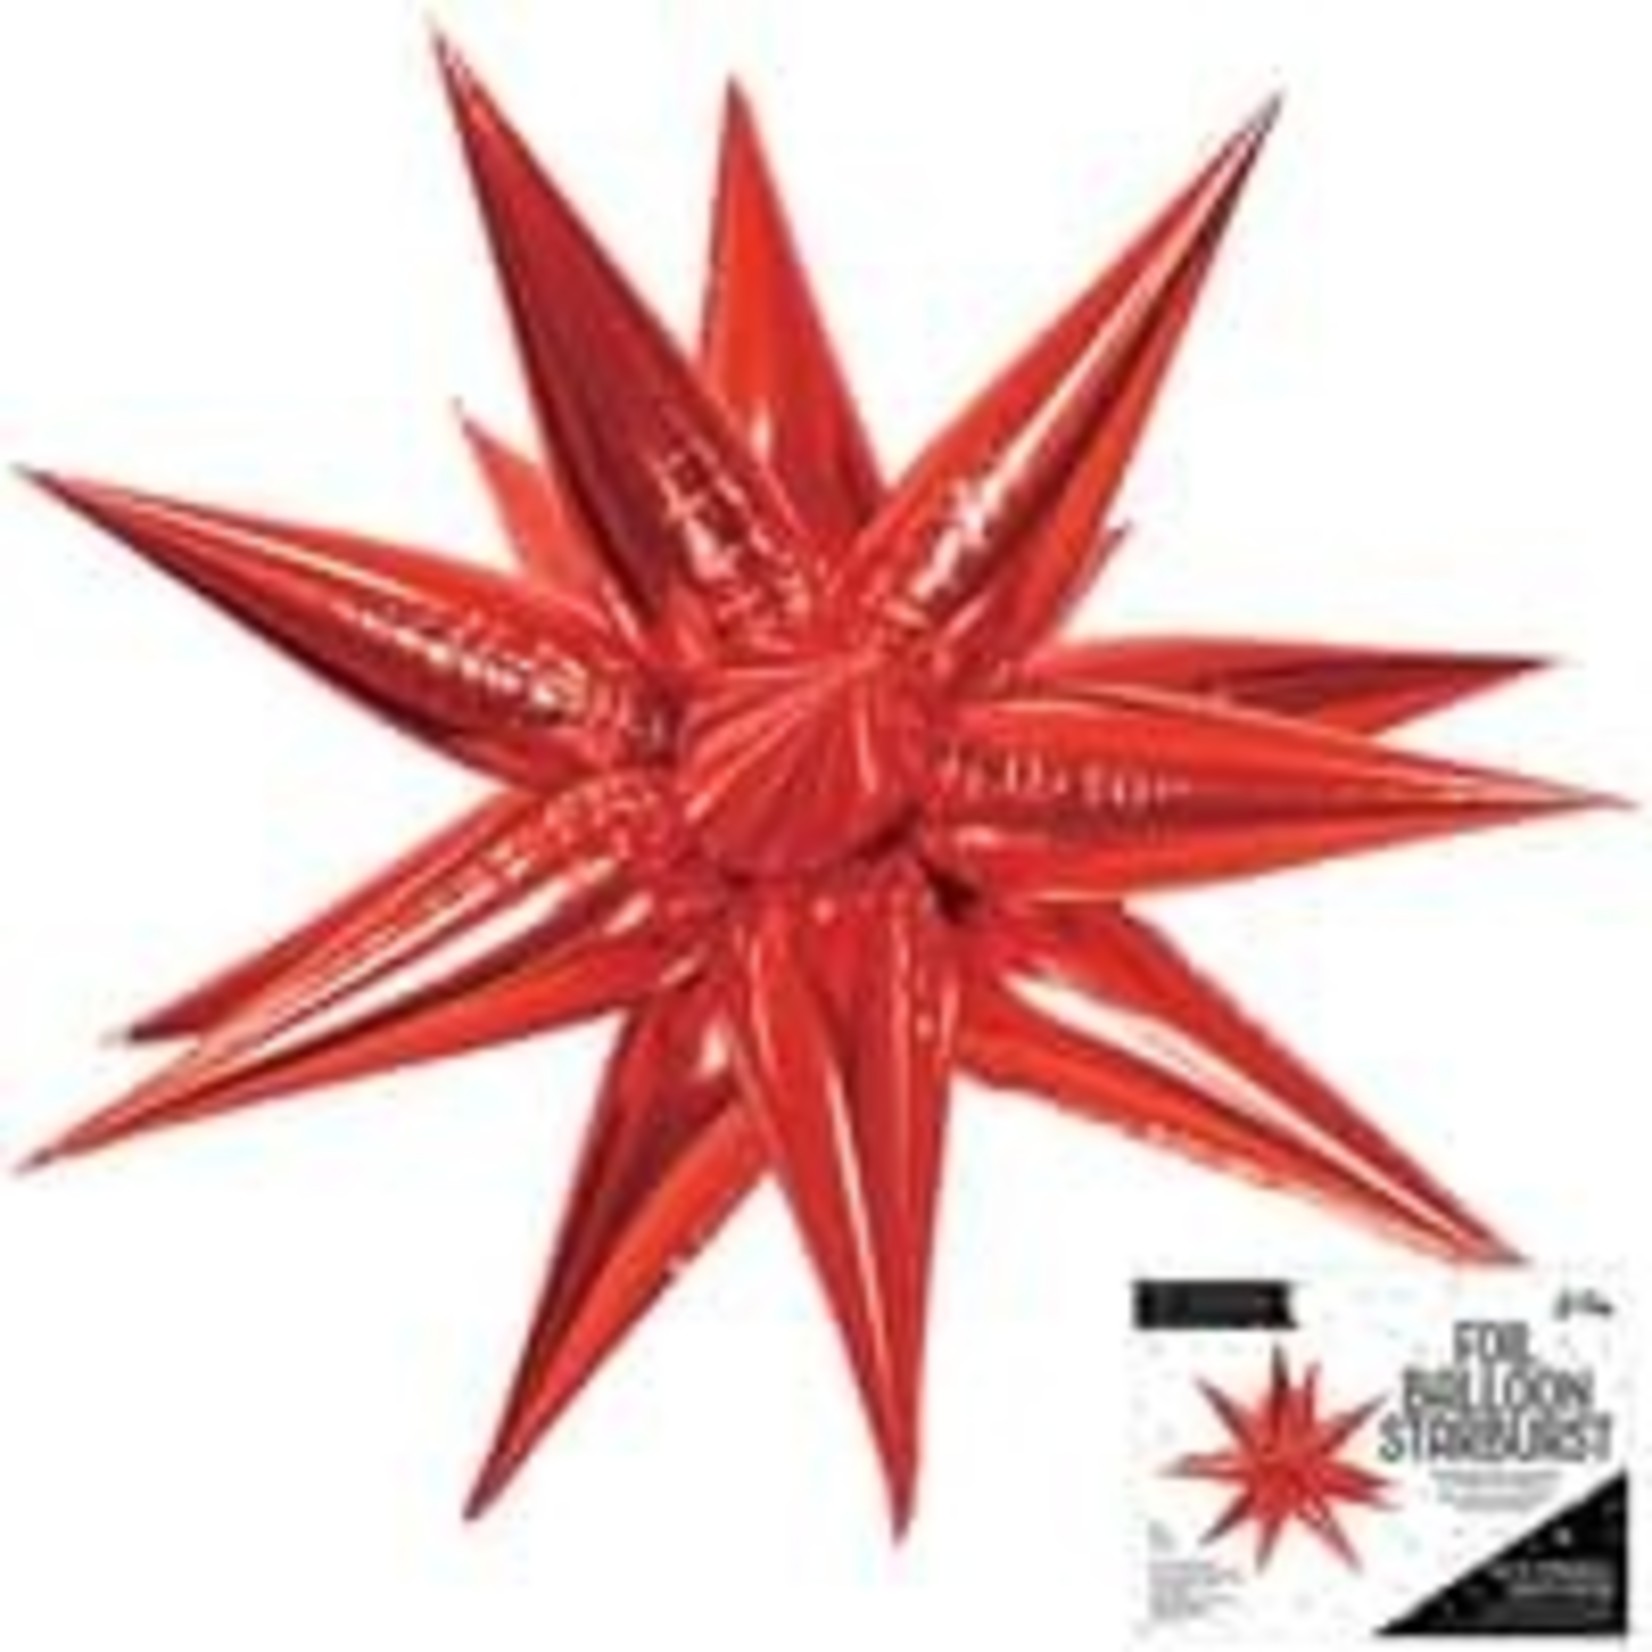 La Fete 26" Red Starburst Balloon - 1ct. (Air-Filled Only)